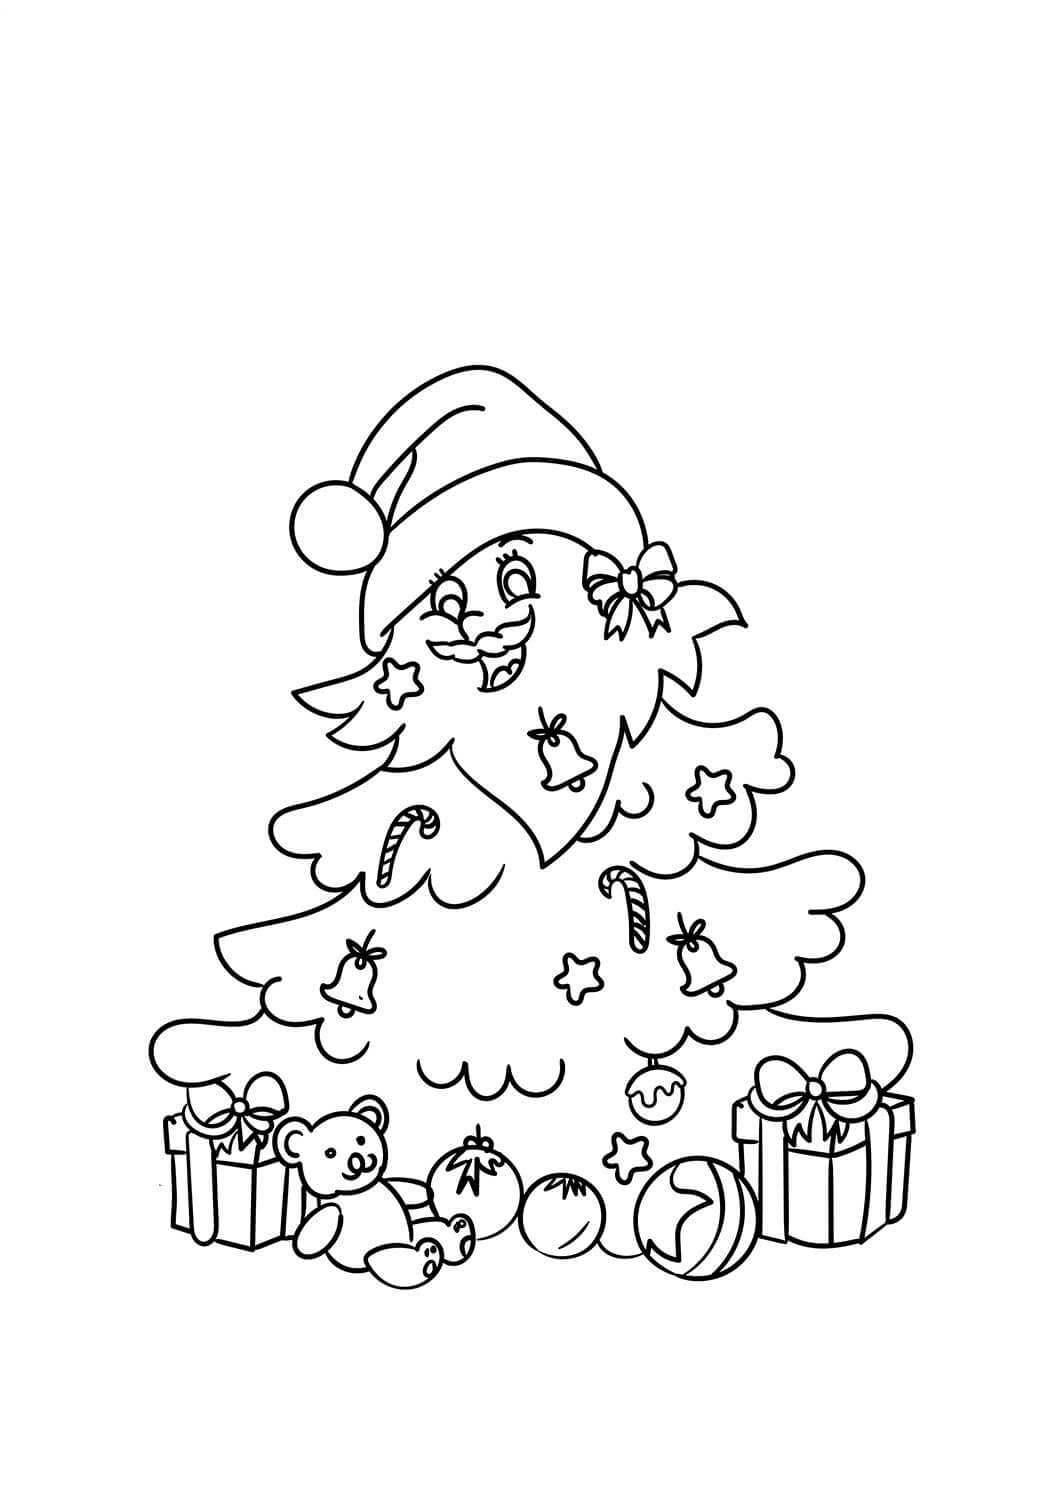 Cute Christmas Tree coloring page